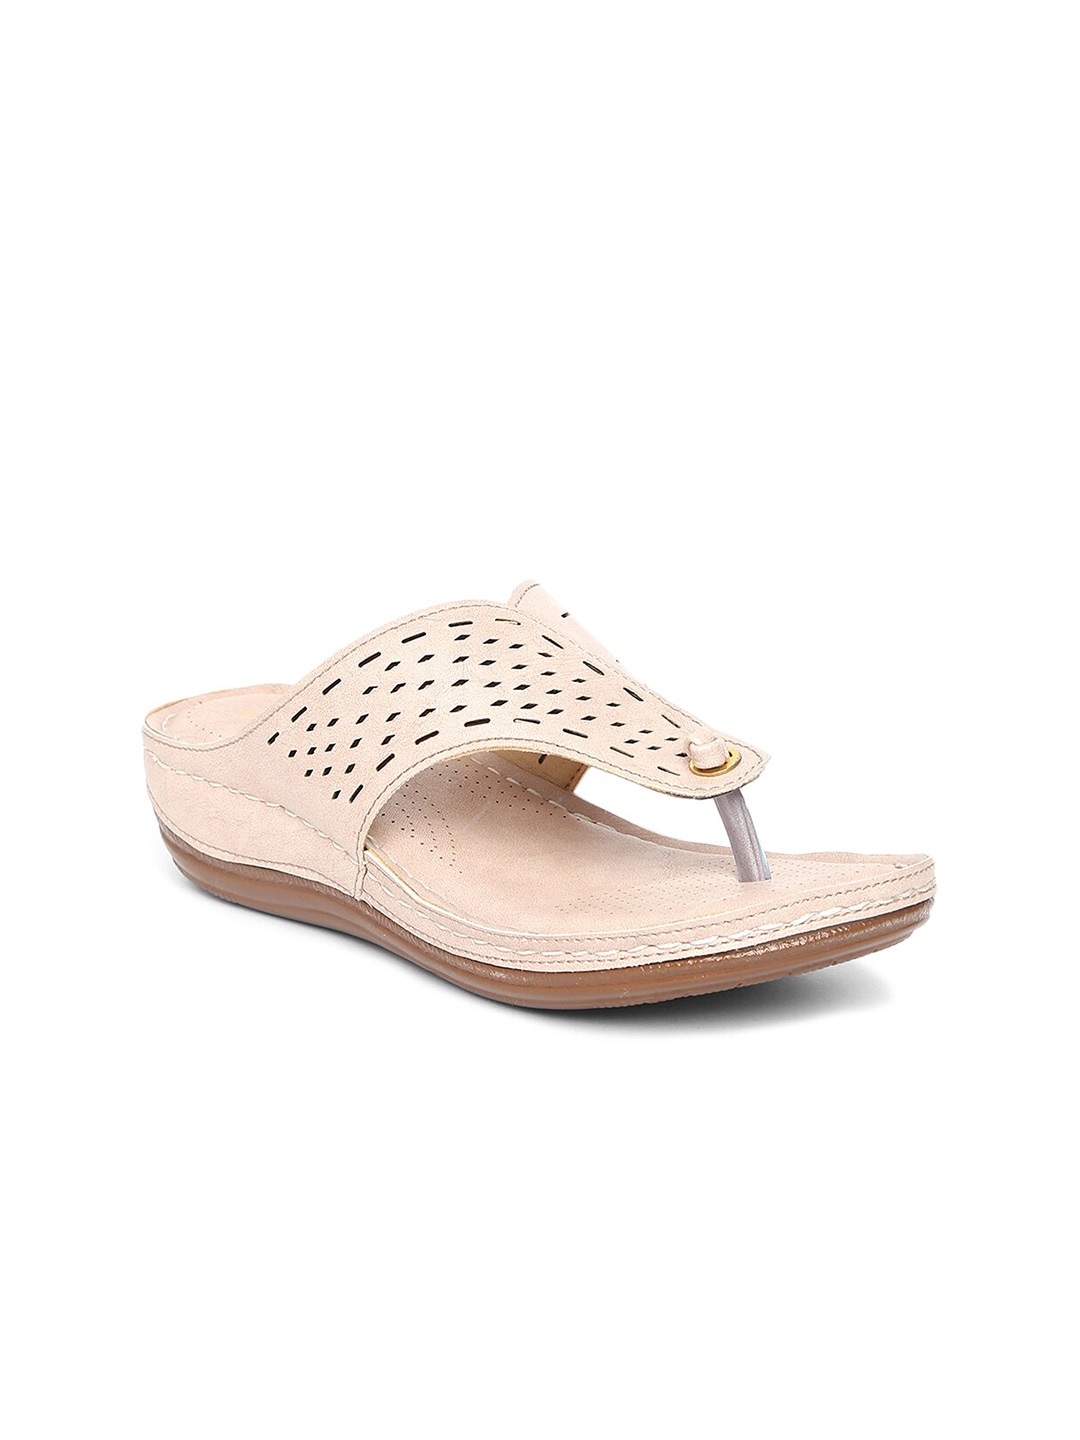 EVERLY Women Pink Textured Open Toe Flats with Laser Cuts Price in India